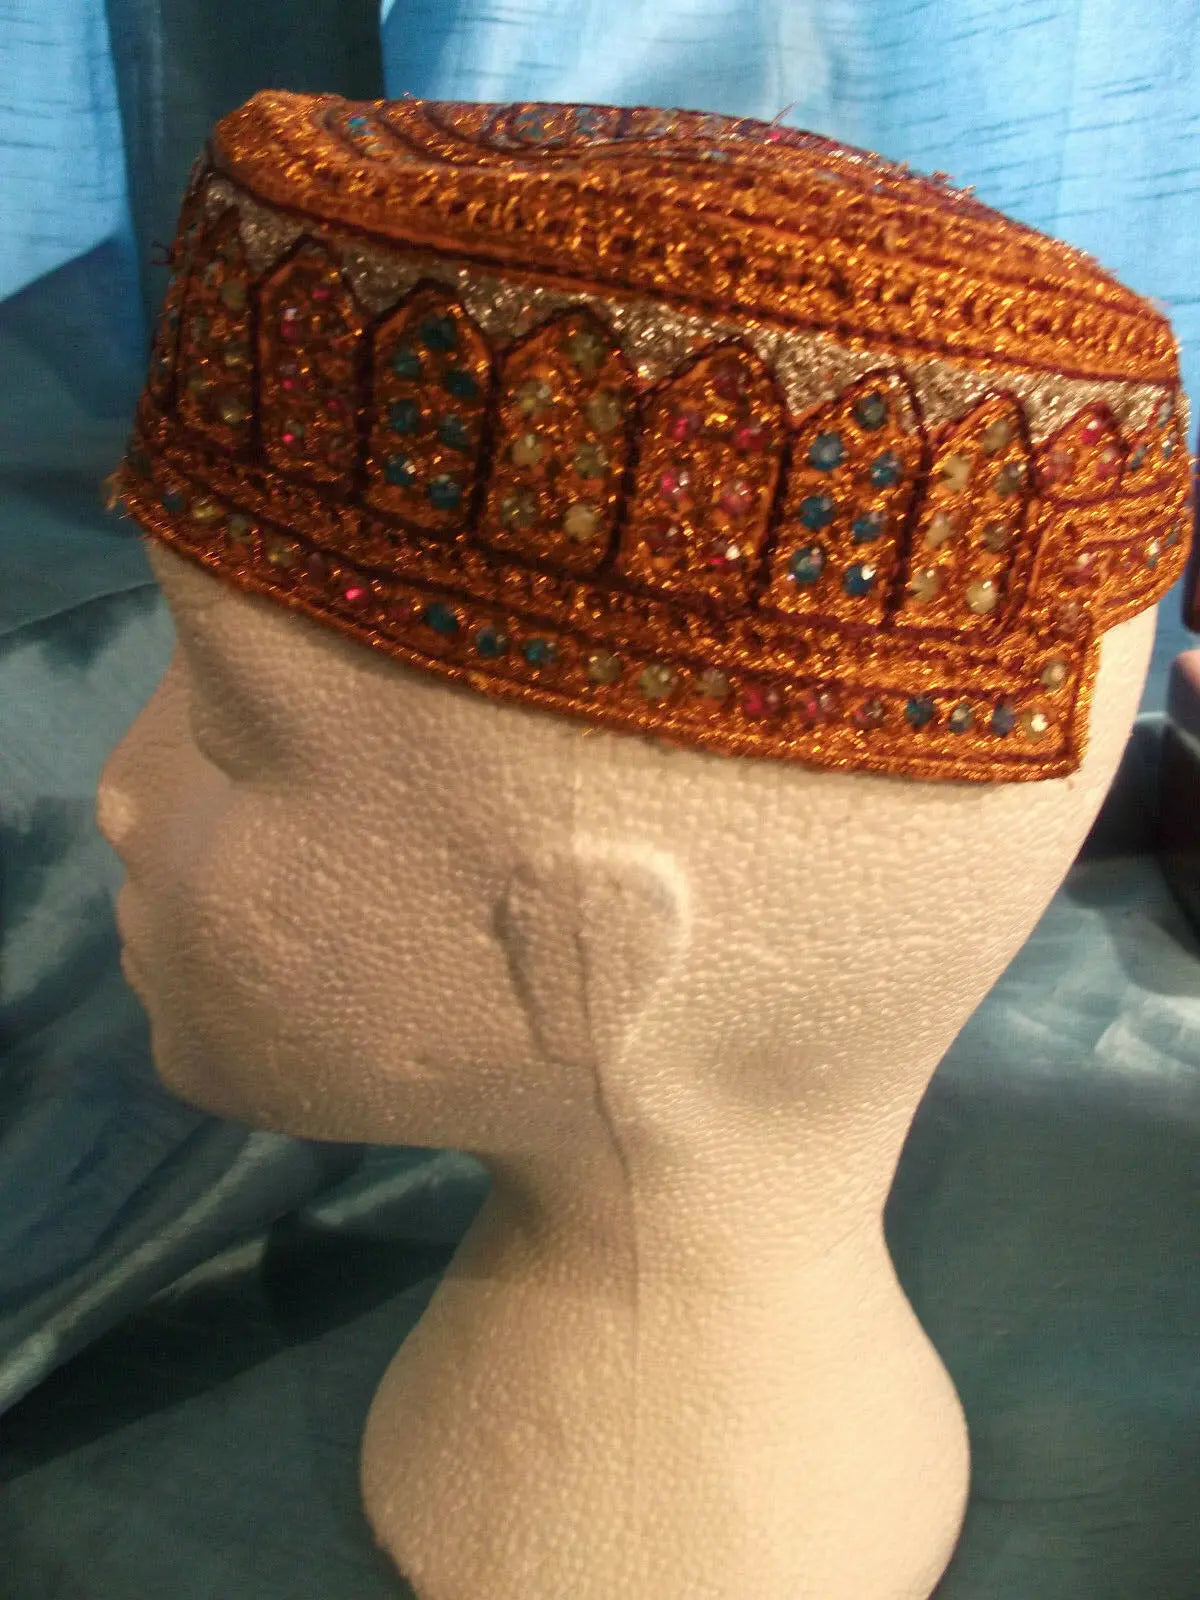 punk/cosplay/festi/stagewear/costume/ ORANGE FEZ STYLE HAT WITH SEQUINS 22"/55CM unbranded. vintage